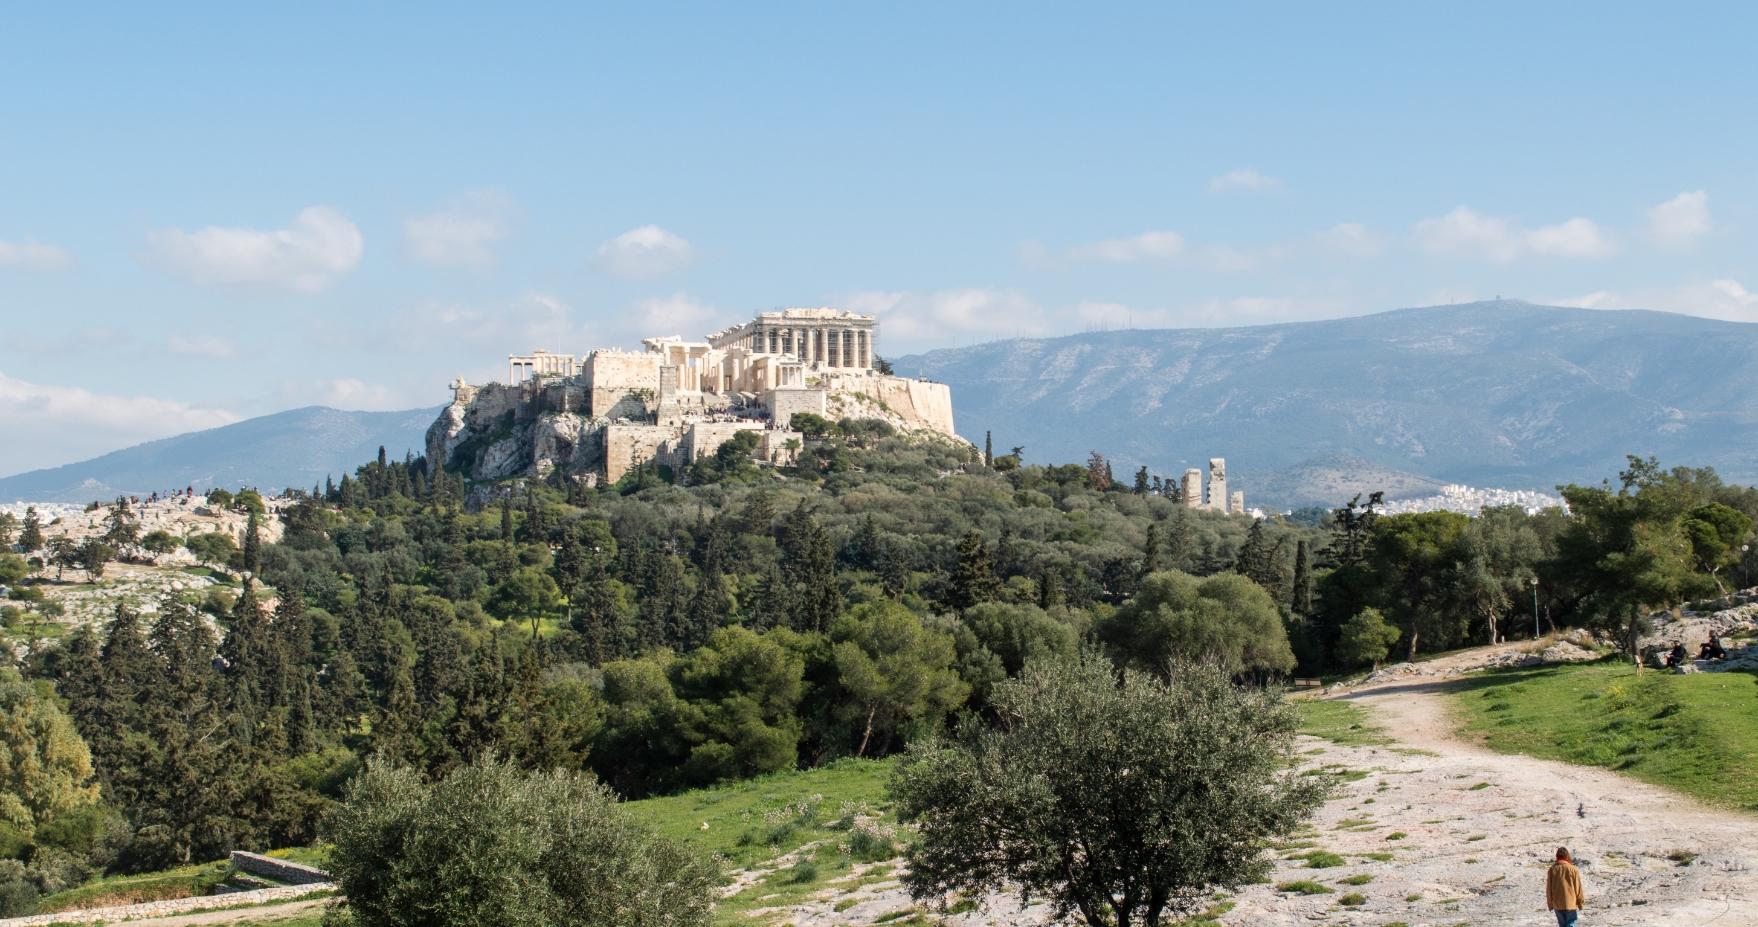 Acropolis, monumental hill in Athens, Greece